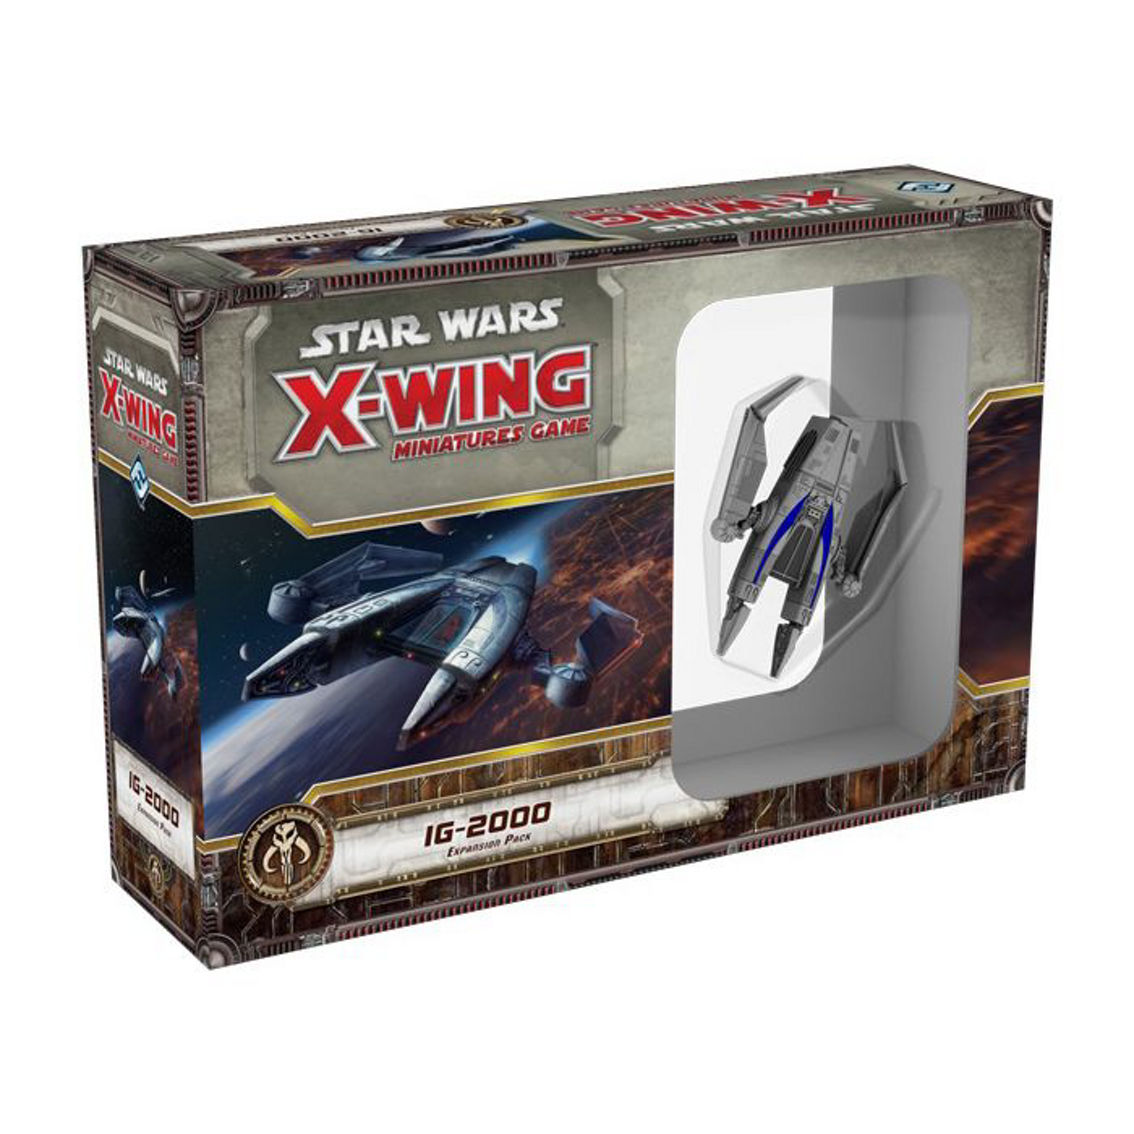 Fantasy Flight Games Star Wars X-Wing Miniatures Game - IG-2000 Expansion Pack - Image 2 of 3